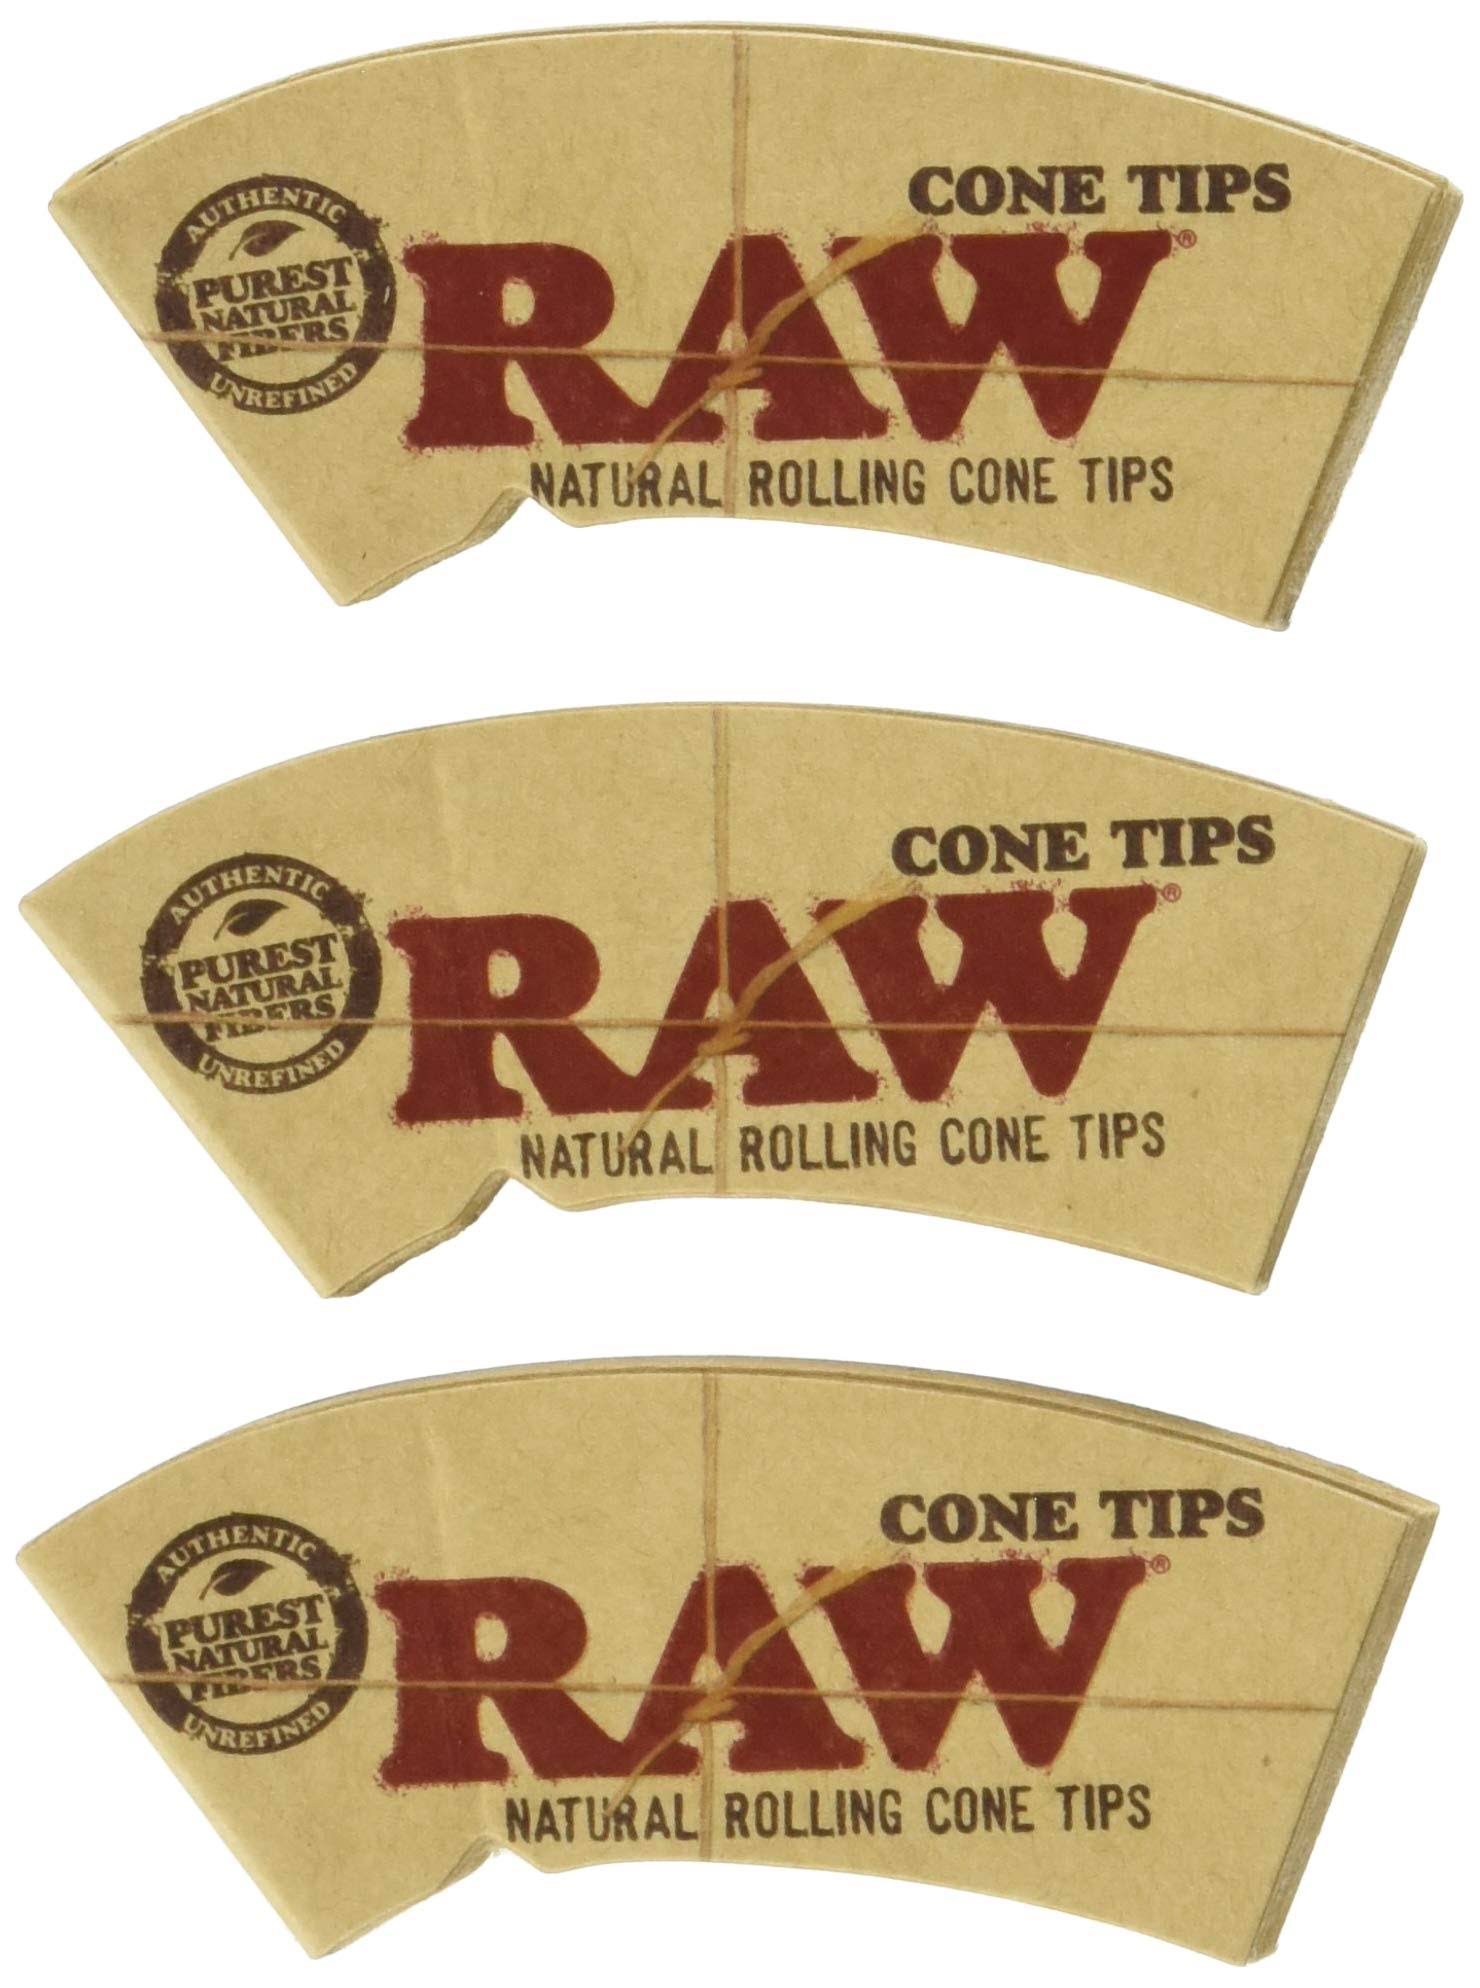 Raw Natural Rolling Cone Tips - 3 Booklets